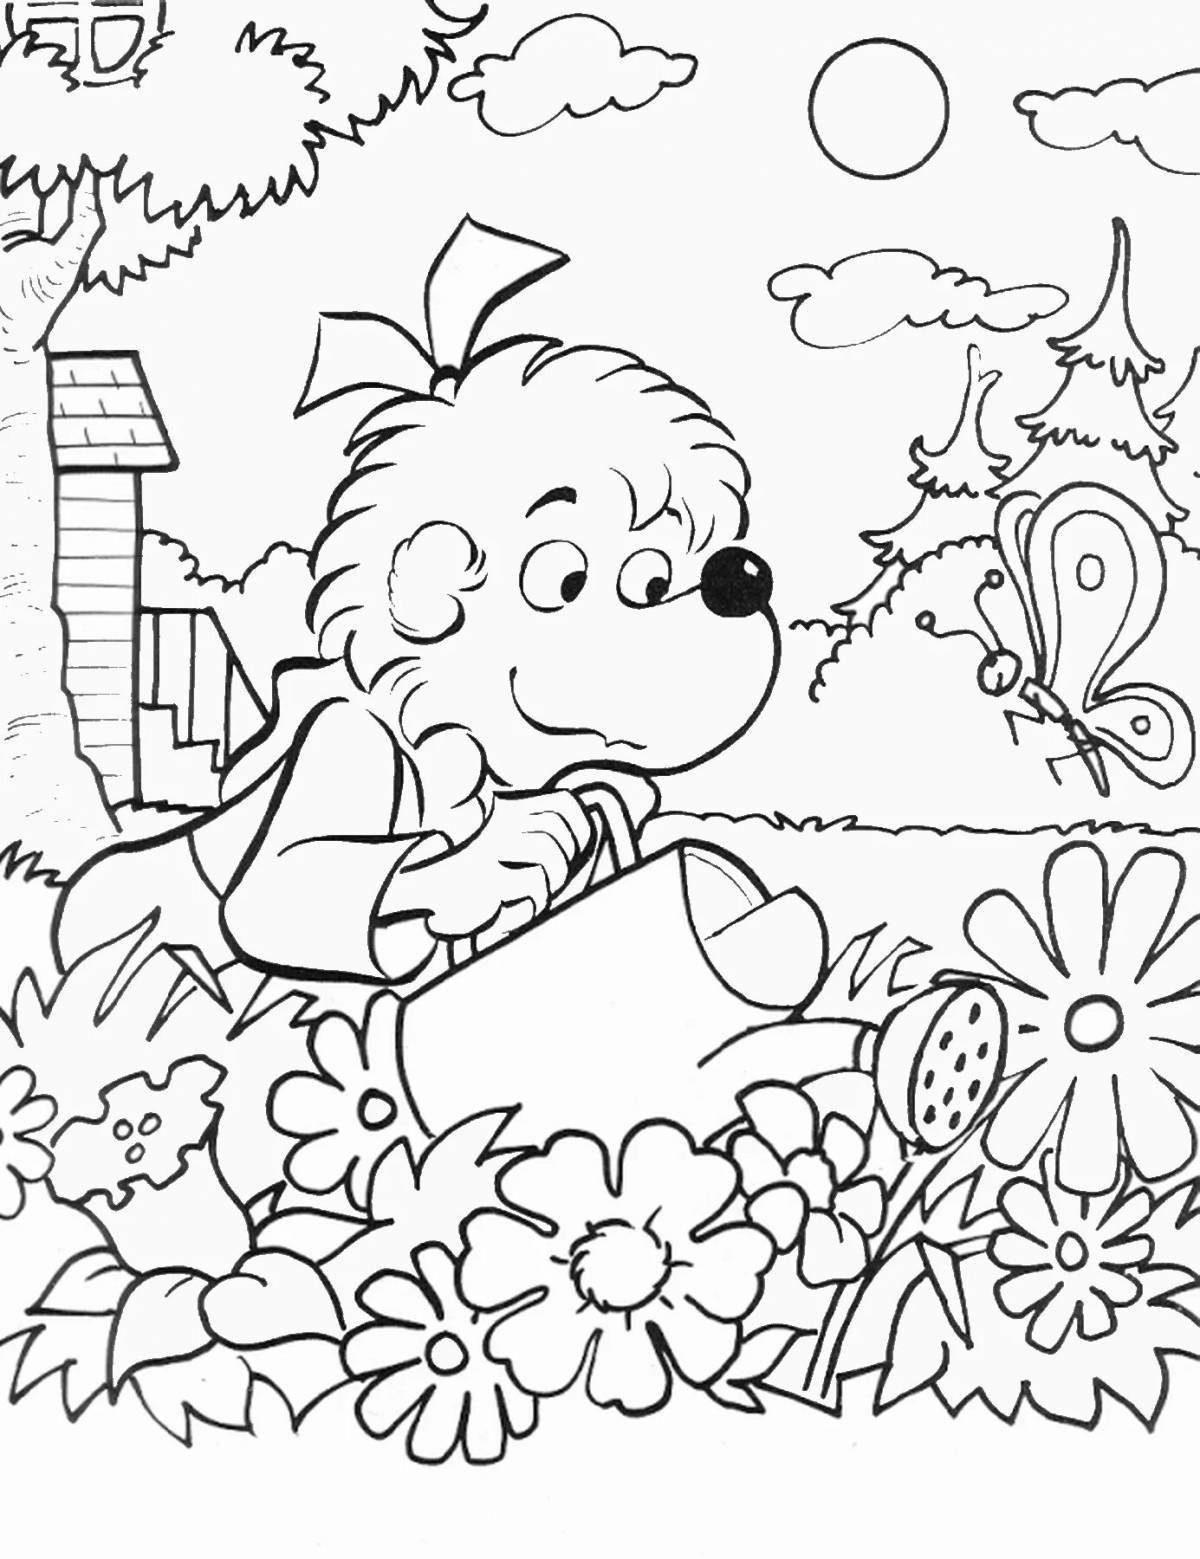 The lush garden coloring pages for children